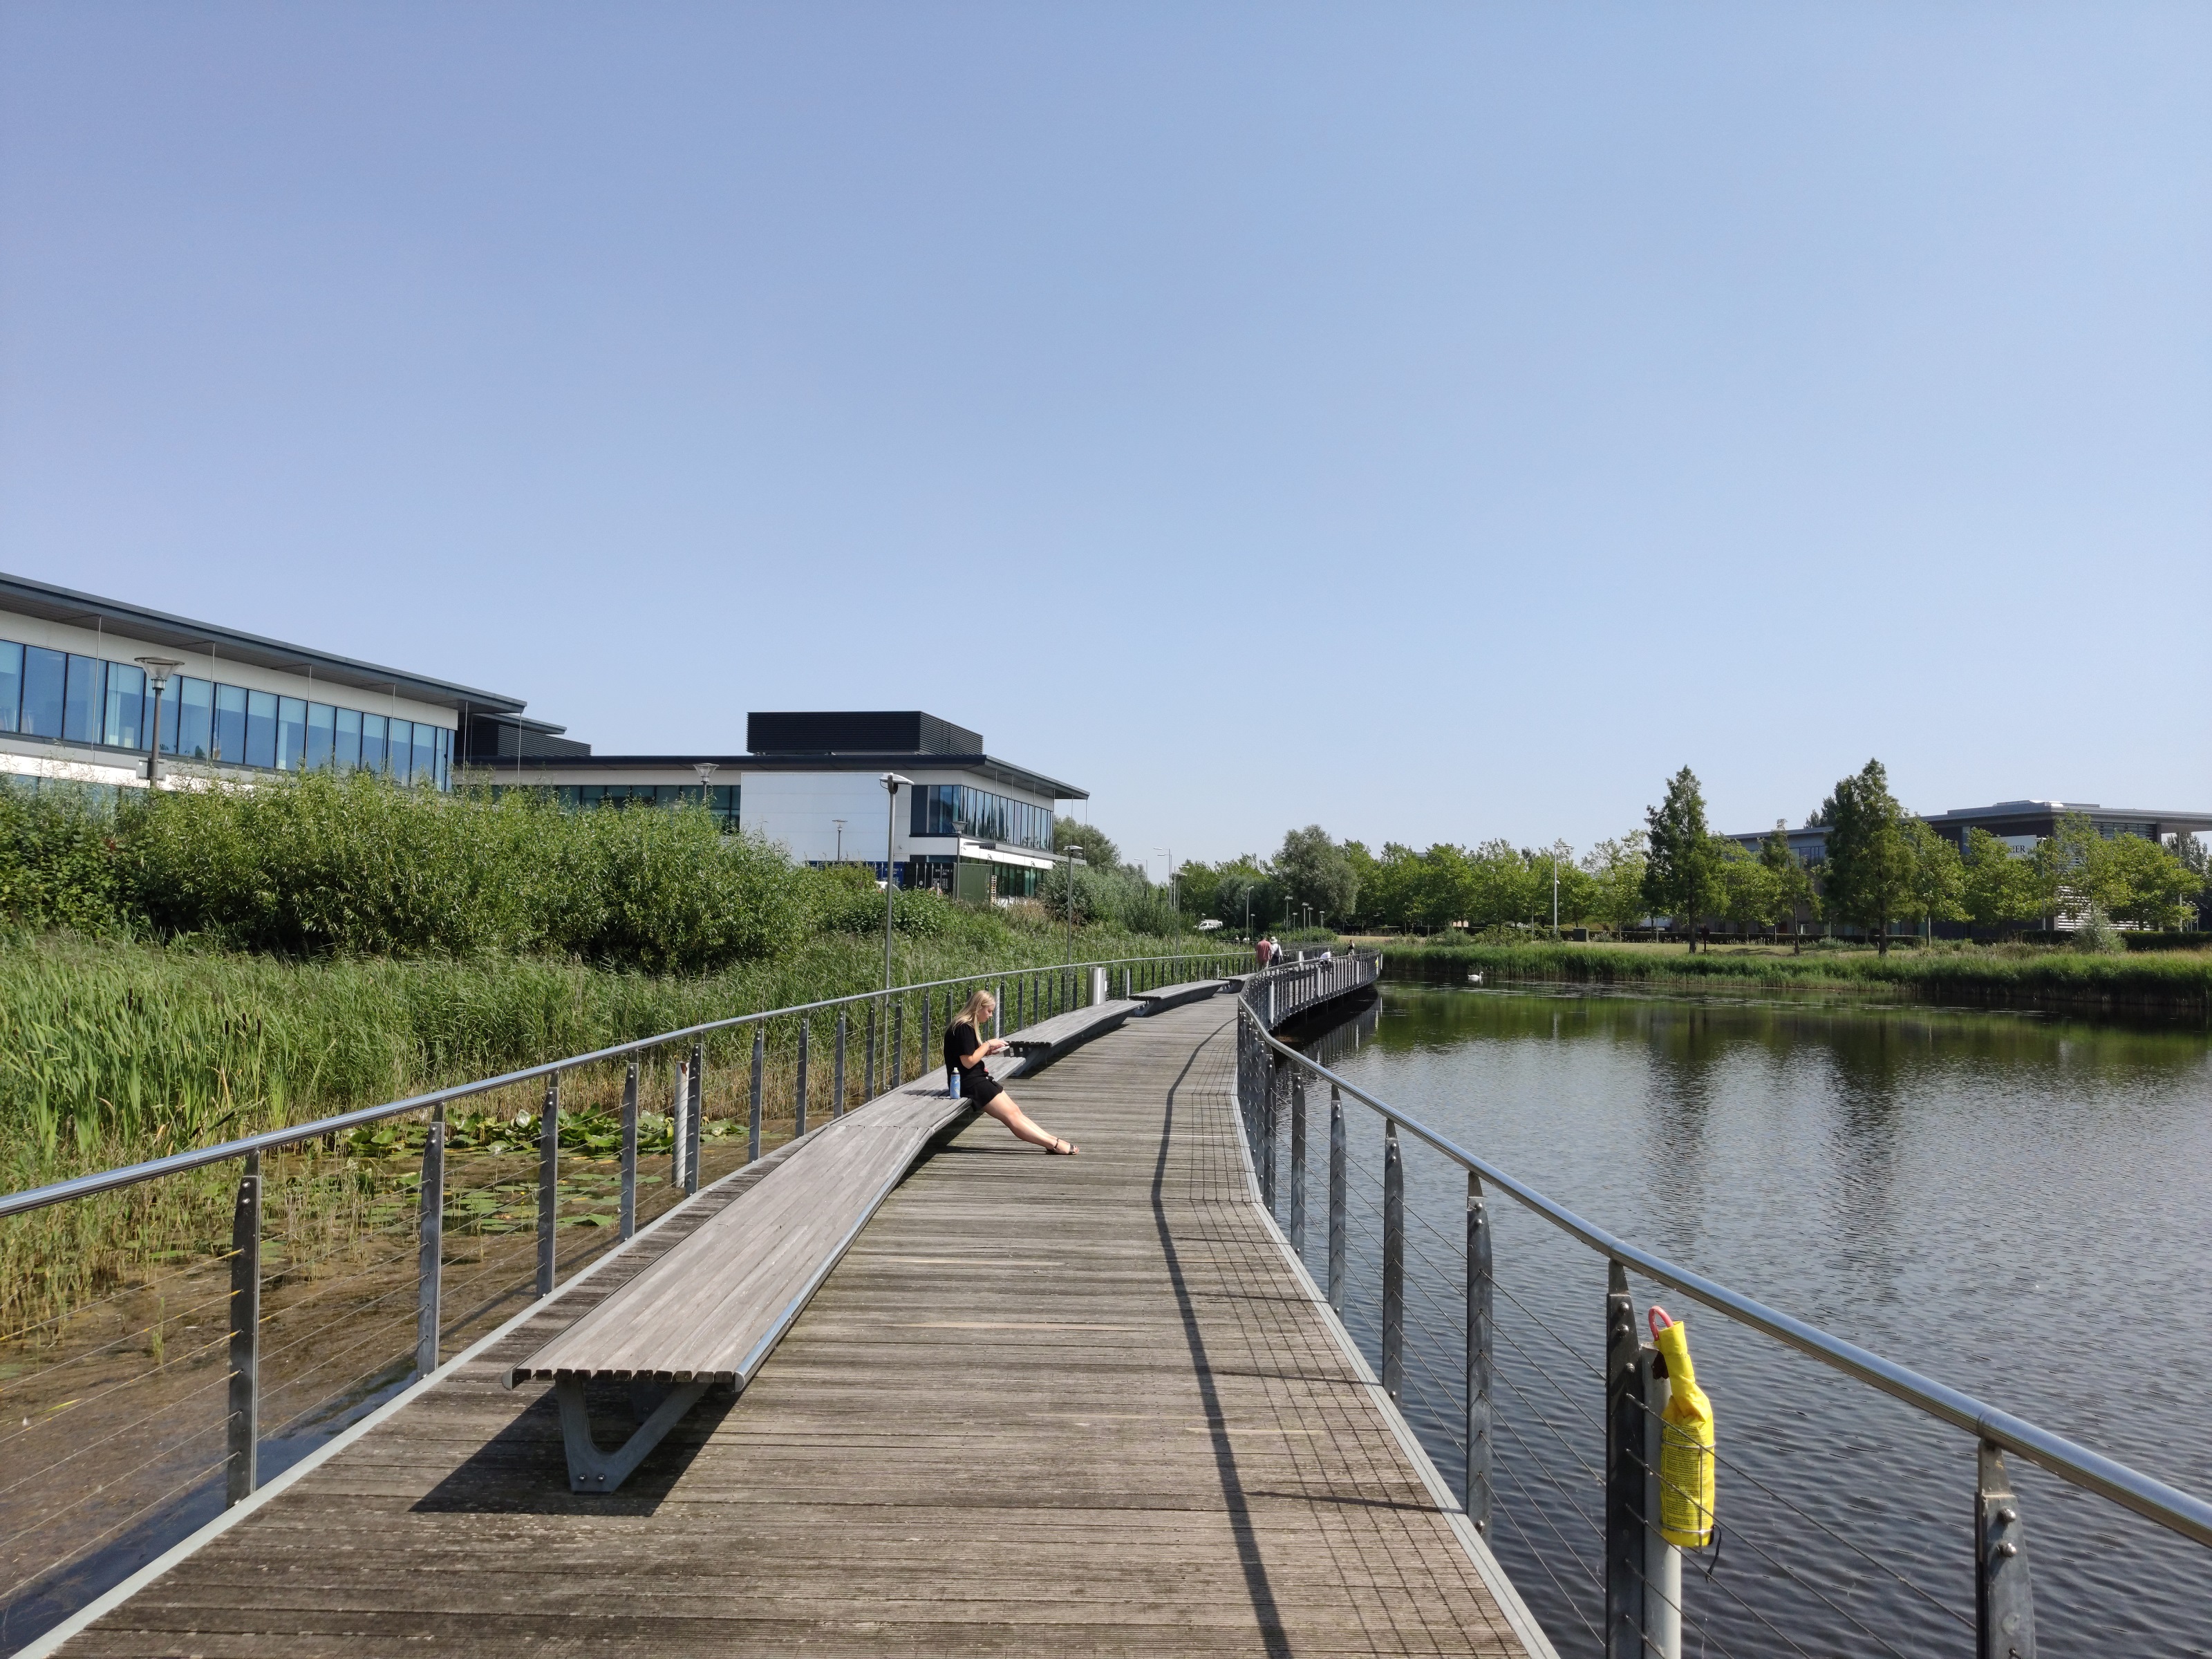 ambridge Research Park, the hottest day in UK4